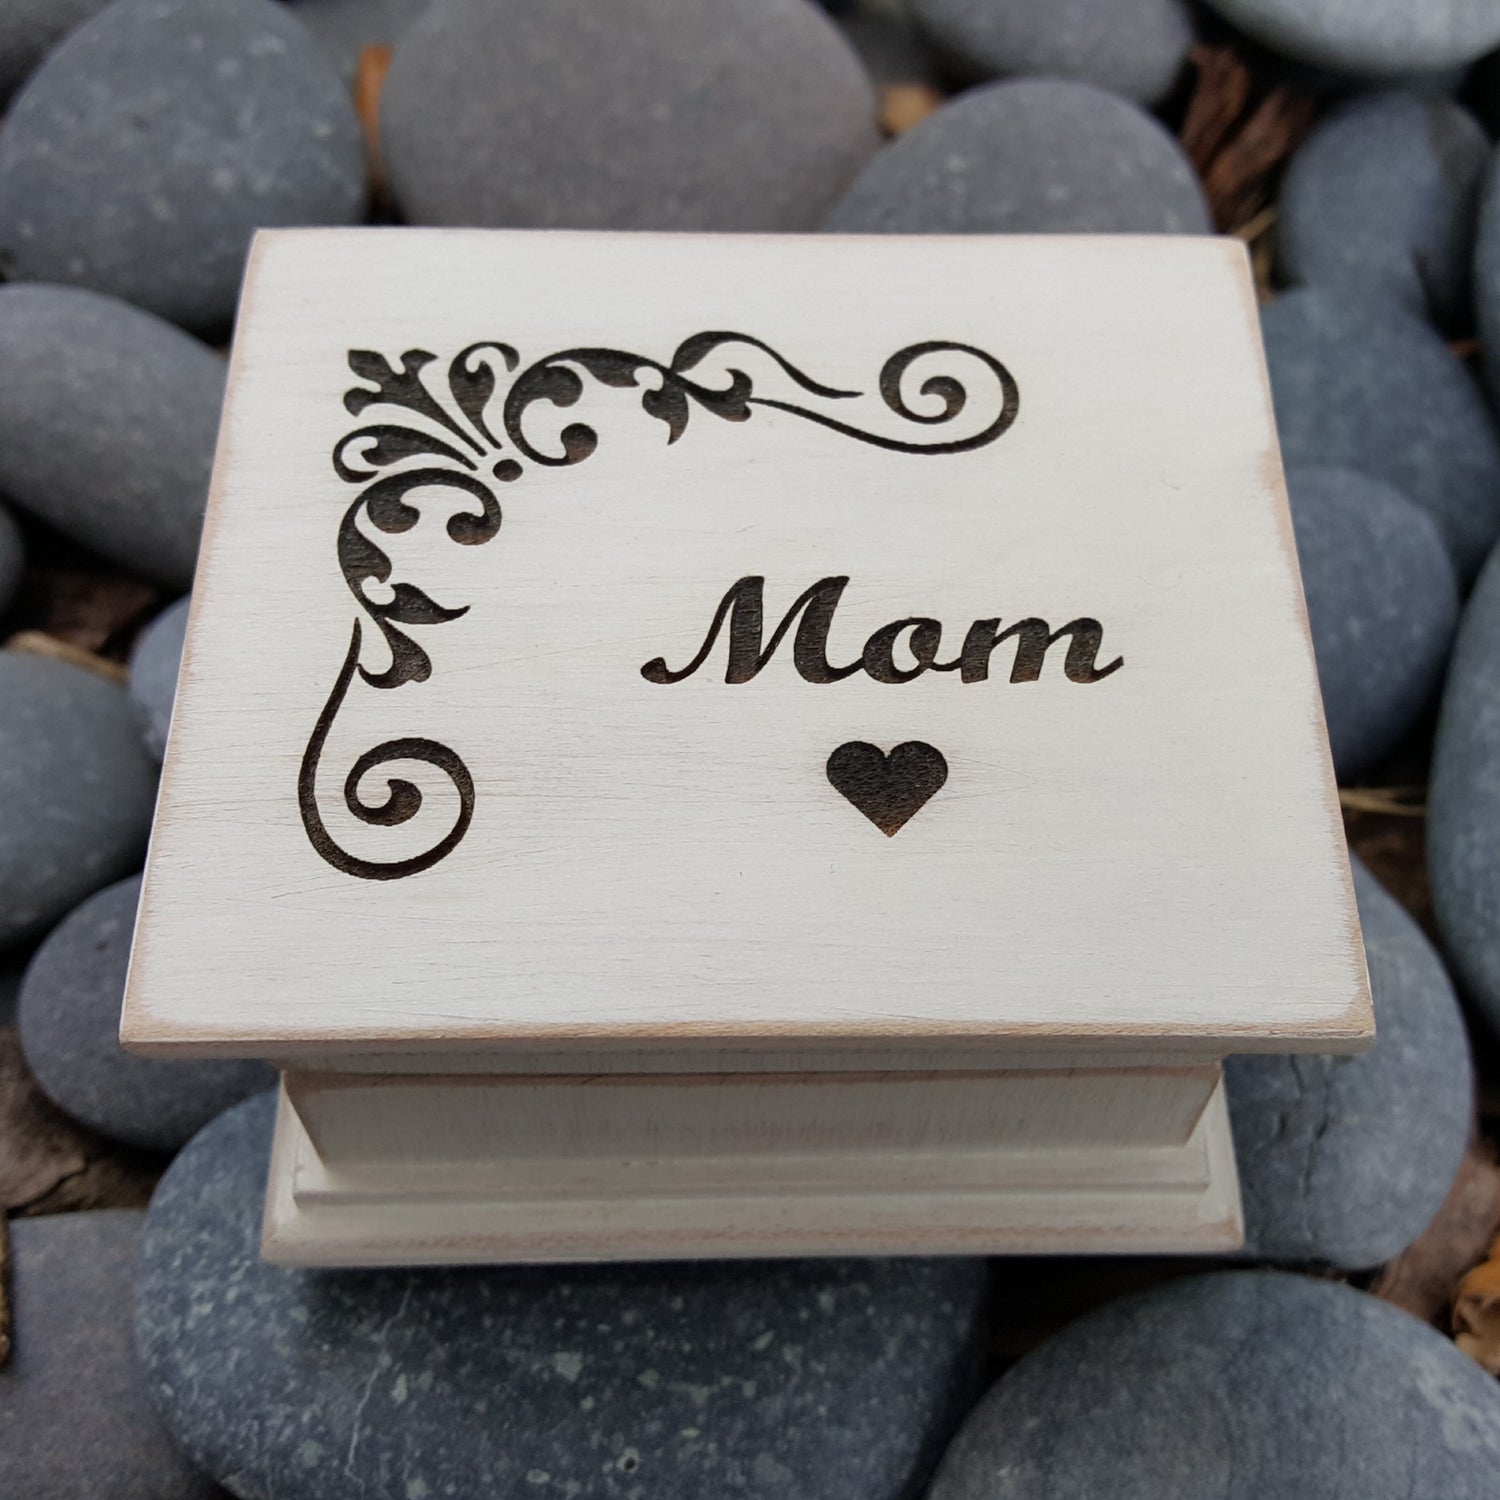 White music box with corner design and Mom with heart engraved on the top